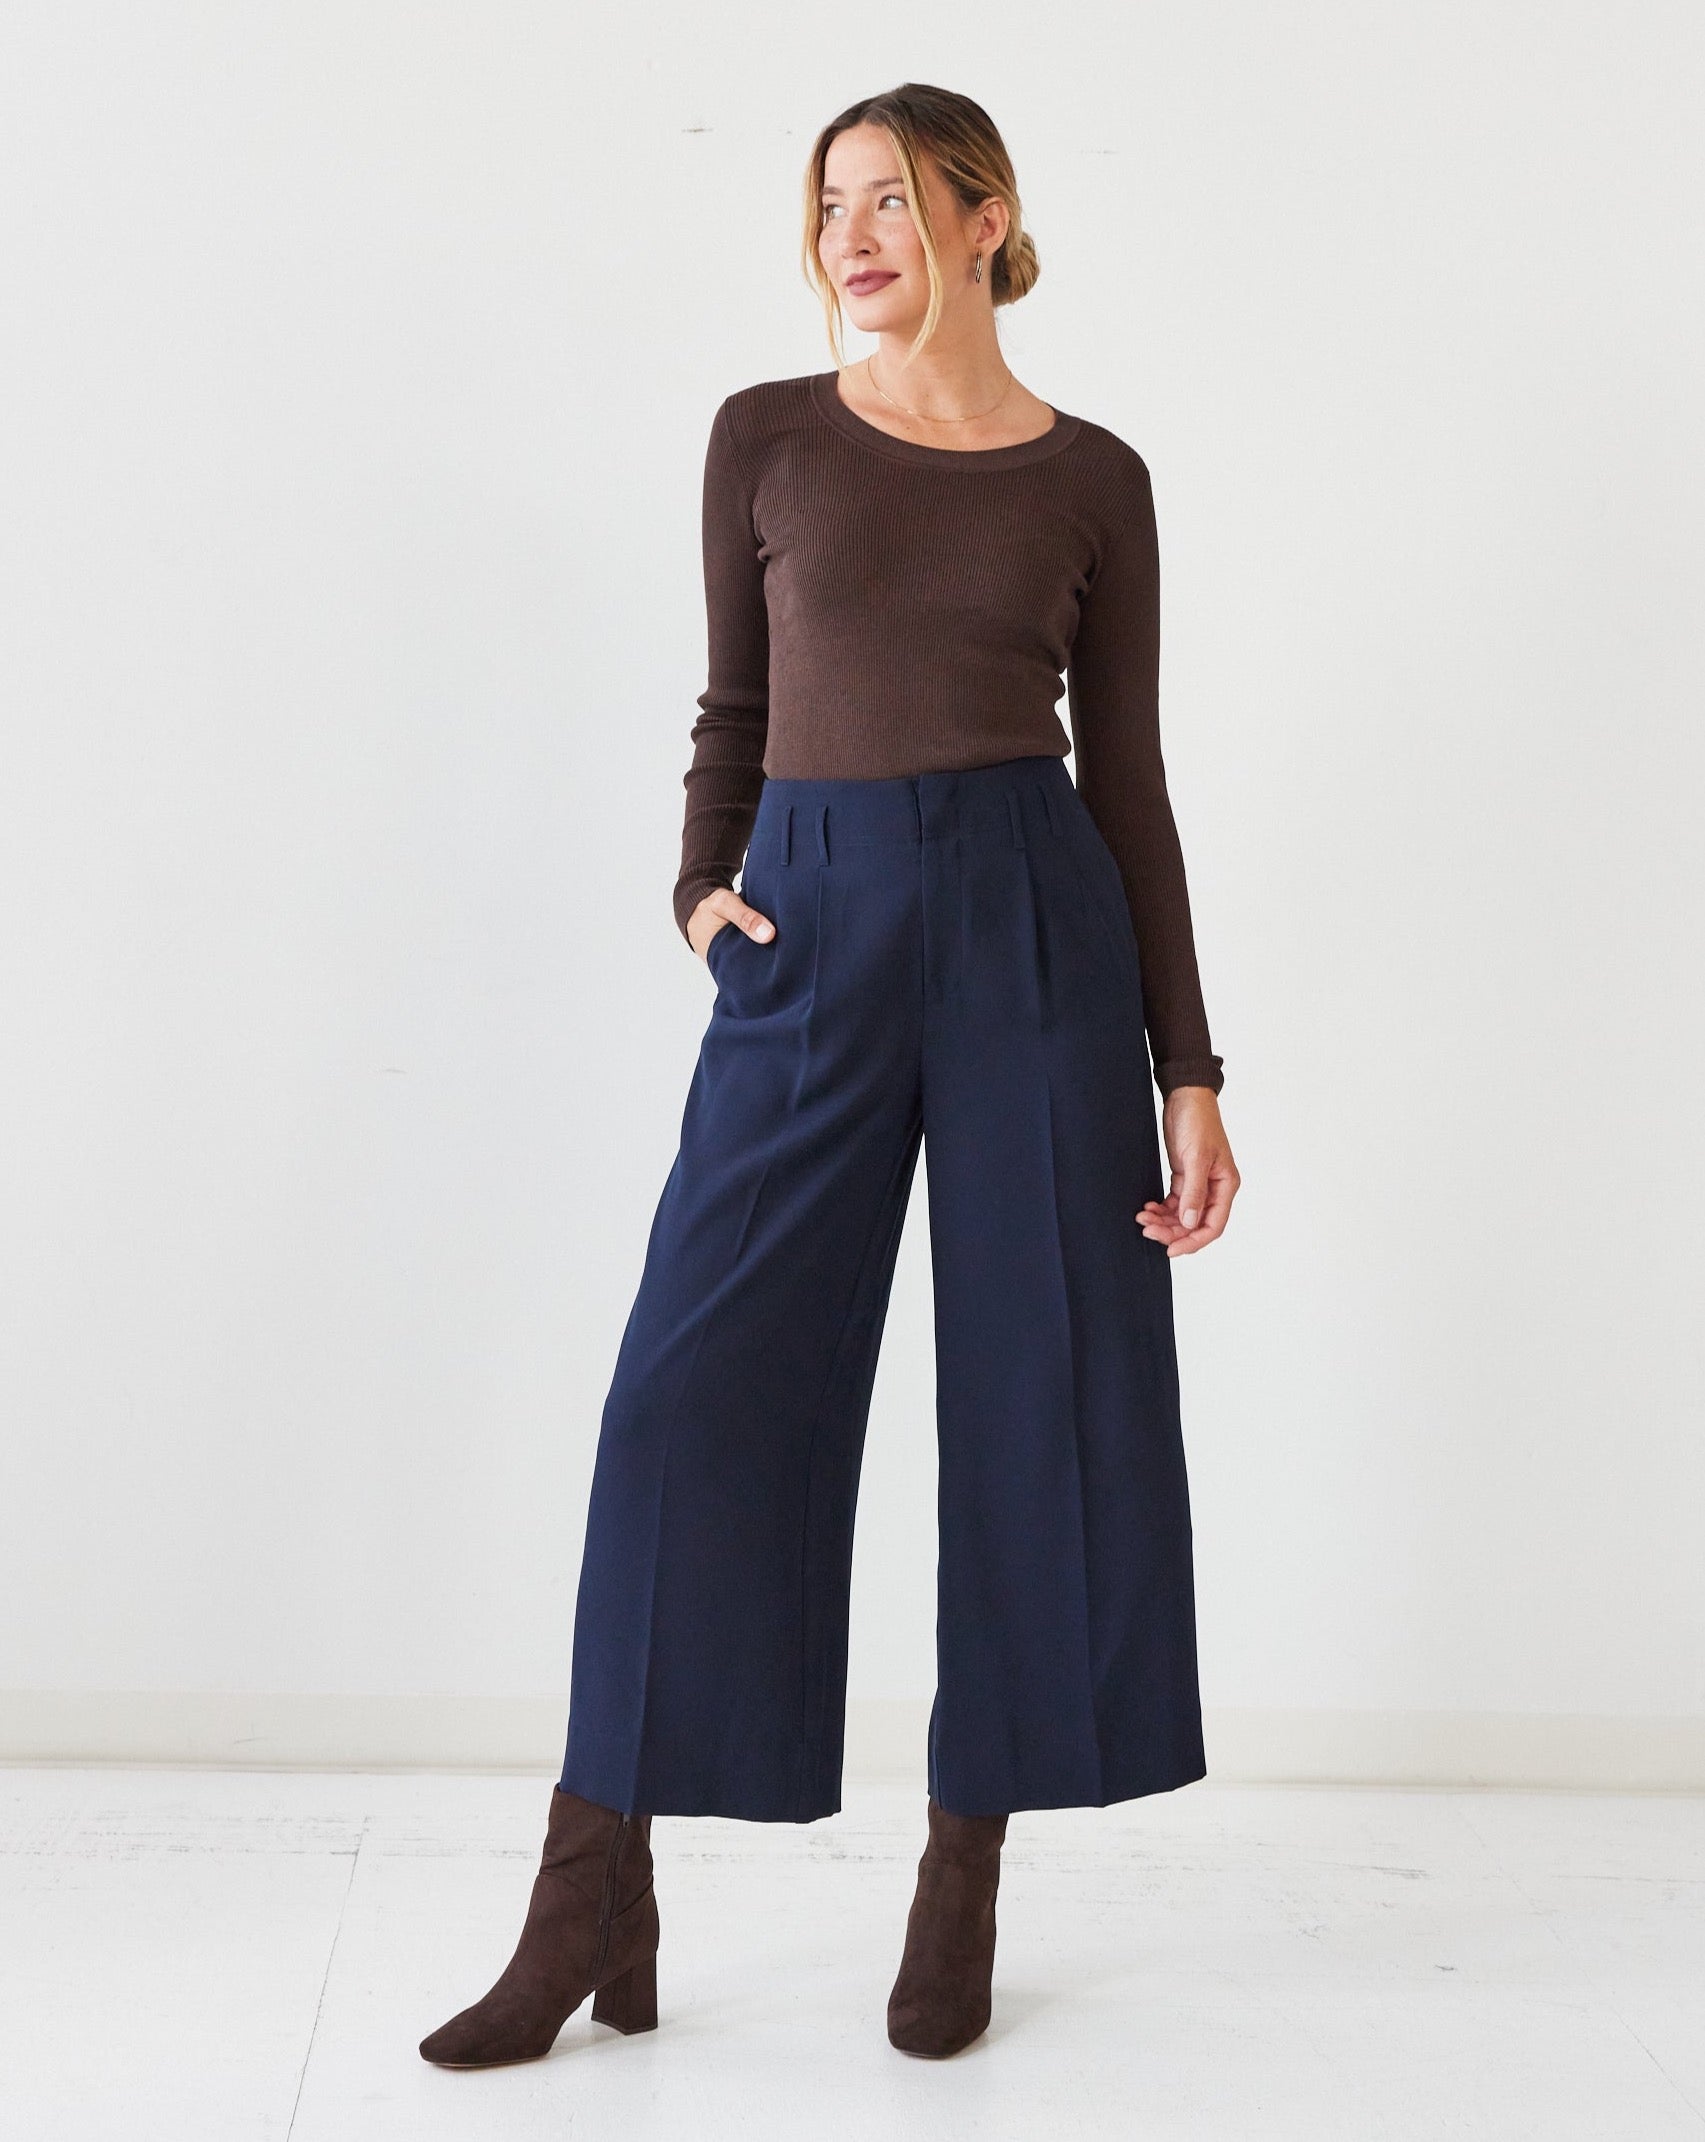 The Ace Pant in Eminence